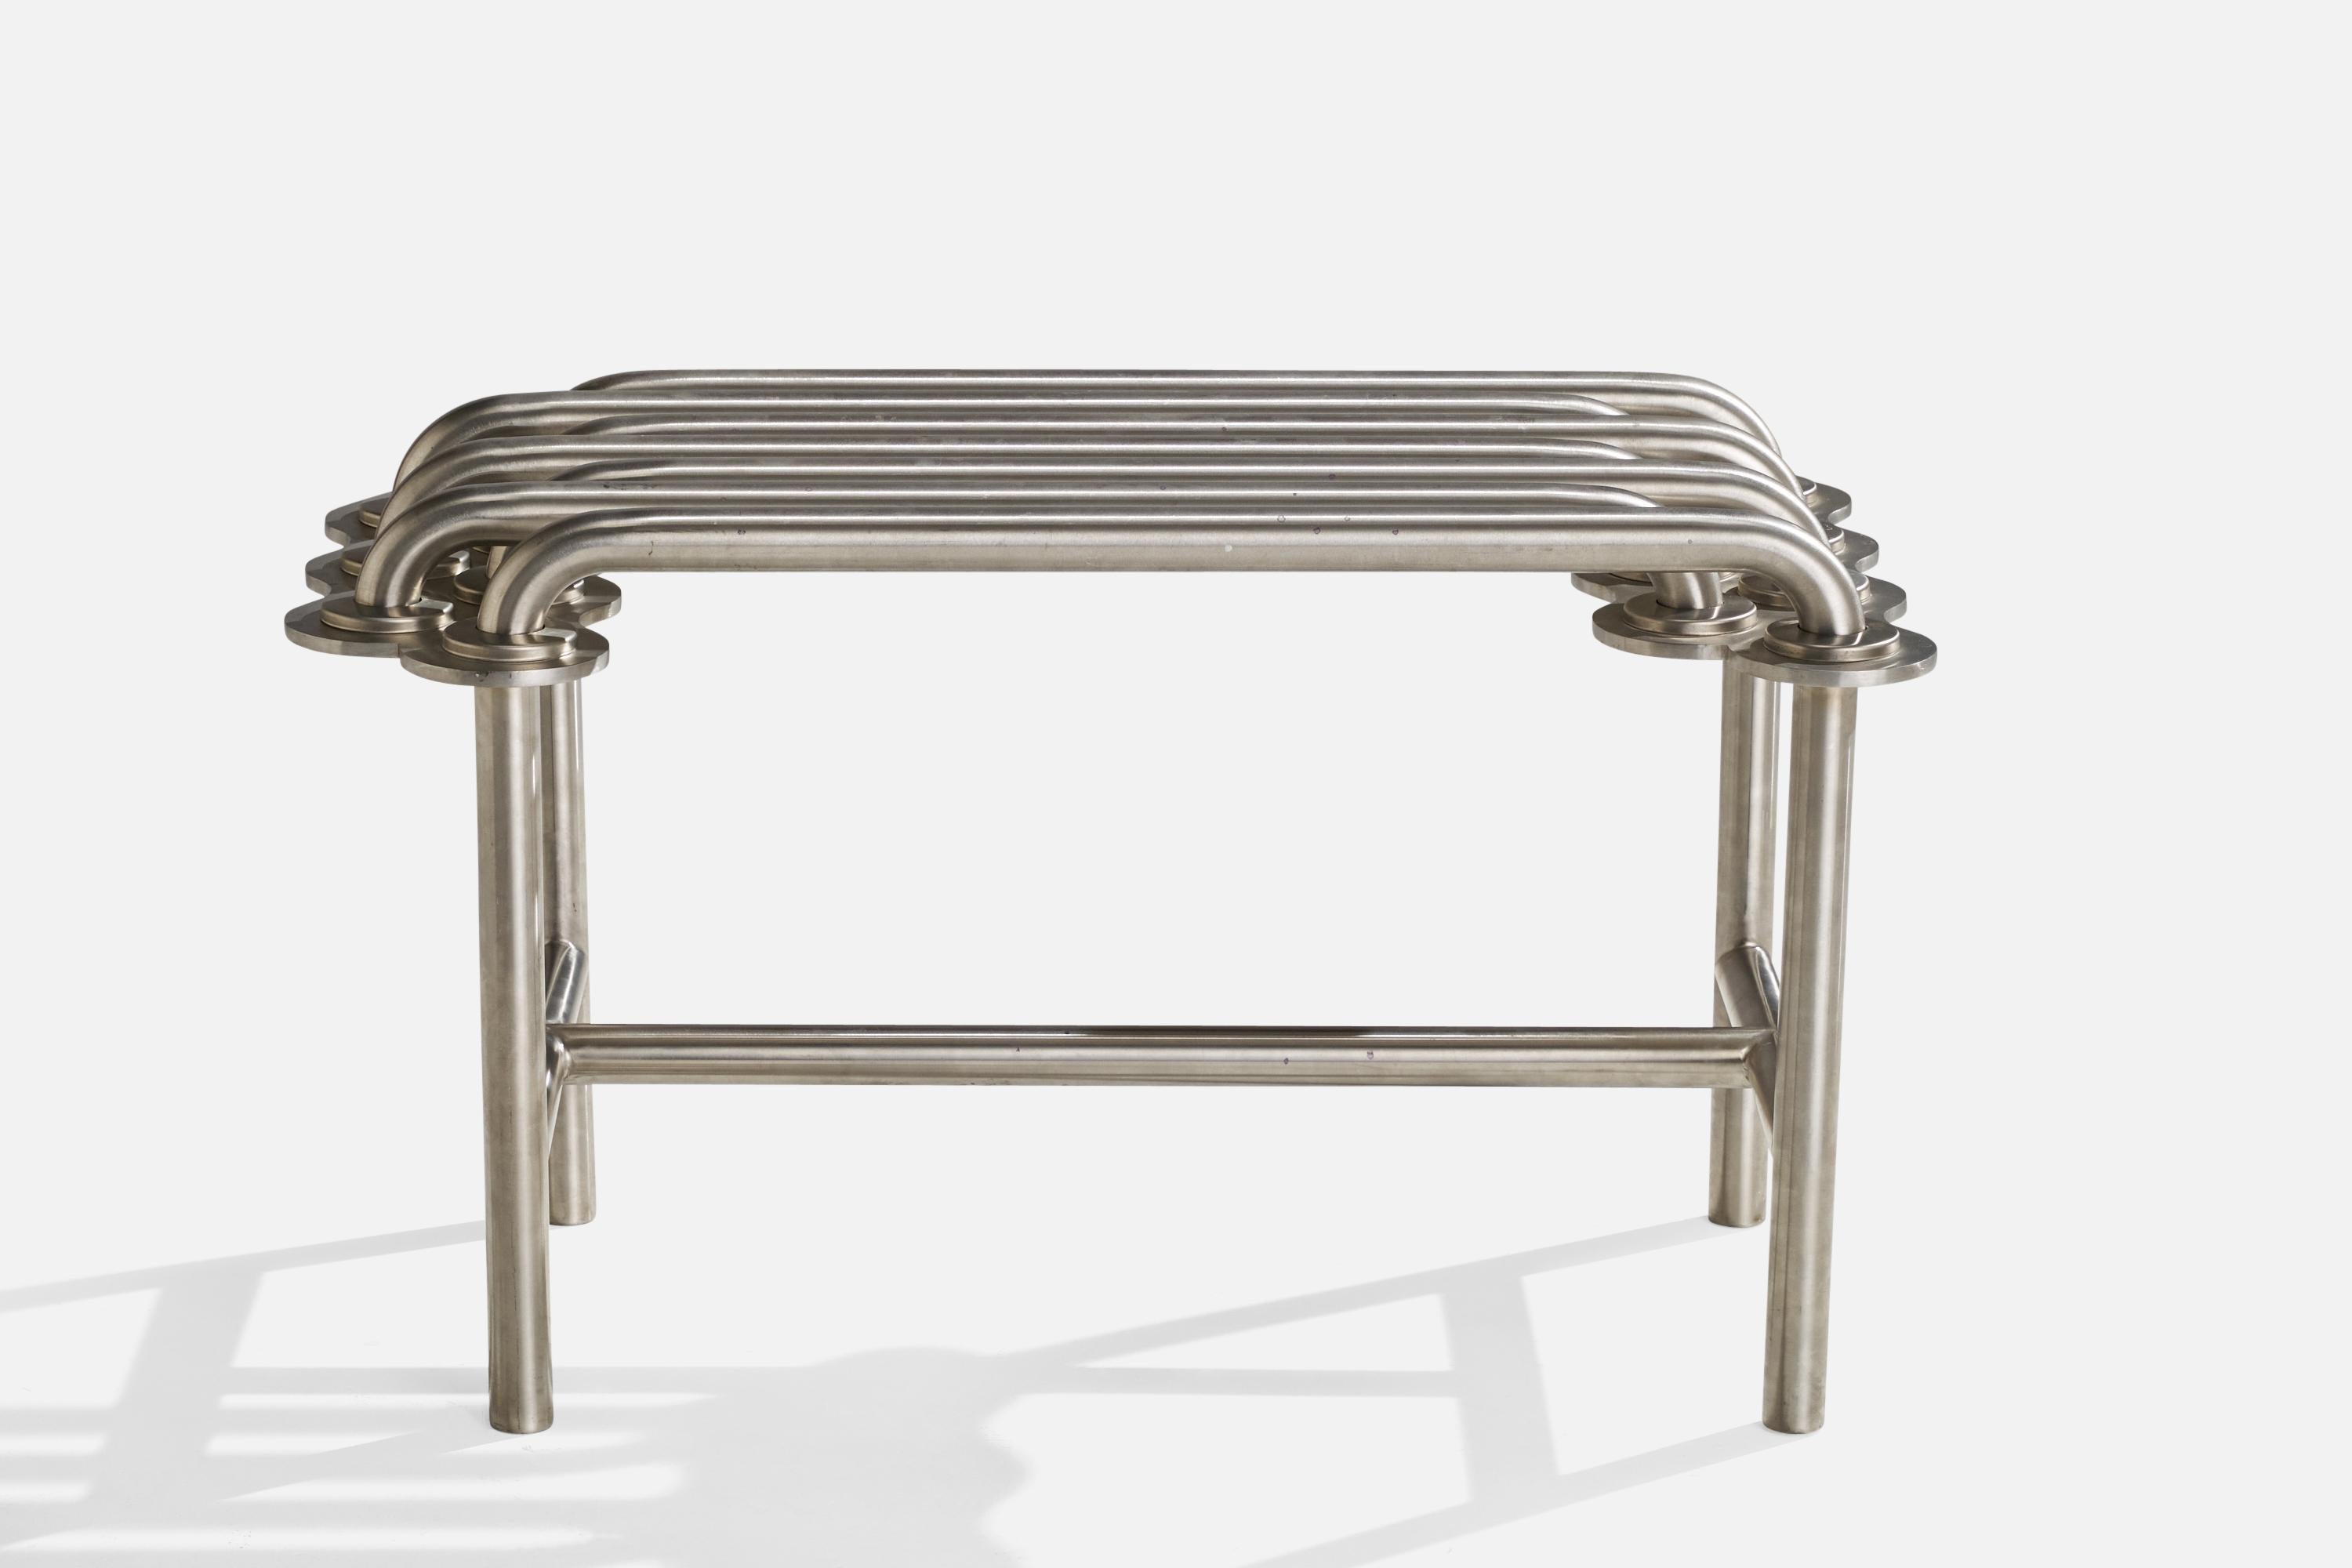 American Jim Drain, Unique Bench, Stainless Steel, Aluminium, USA 2000s For Sale